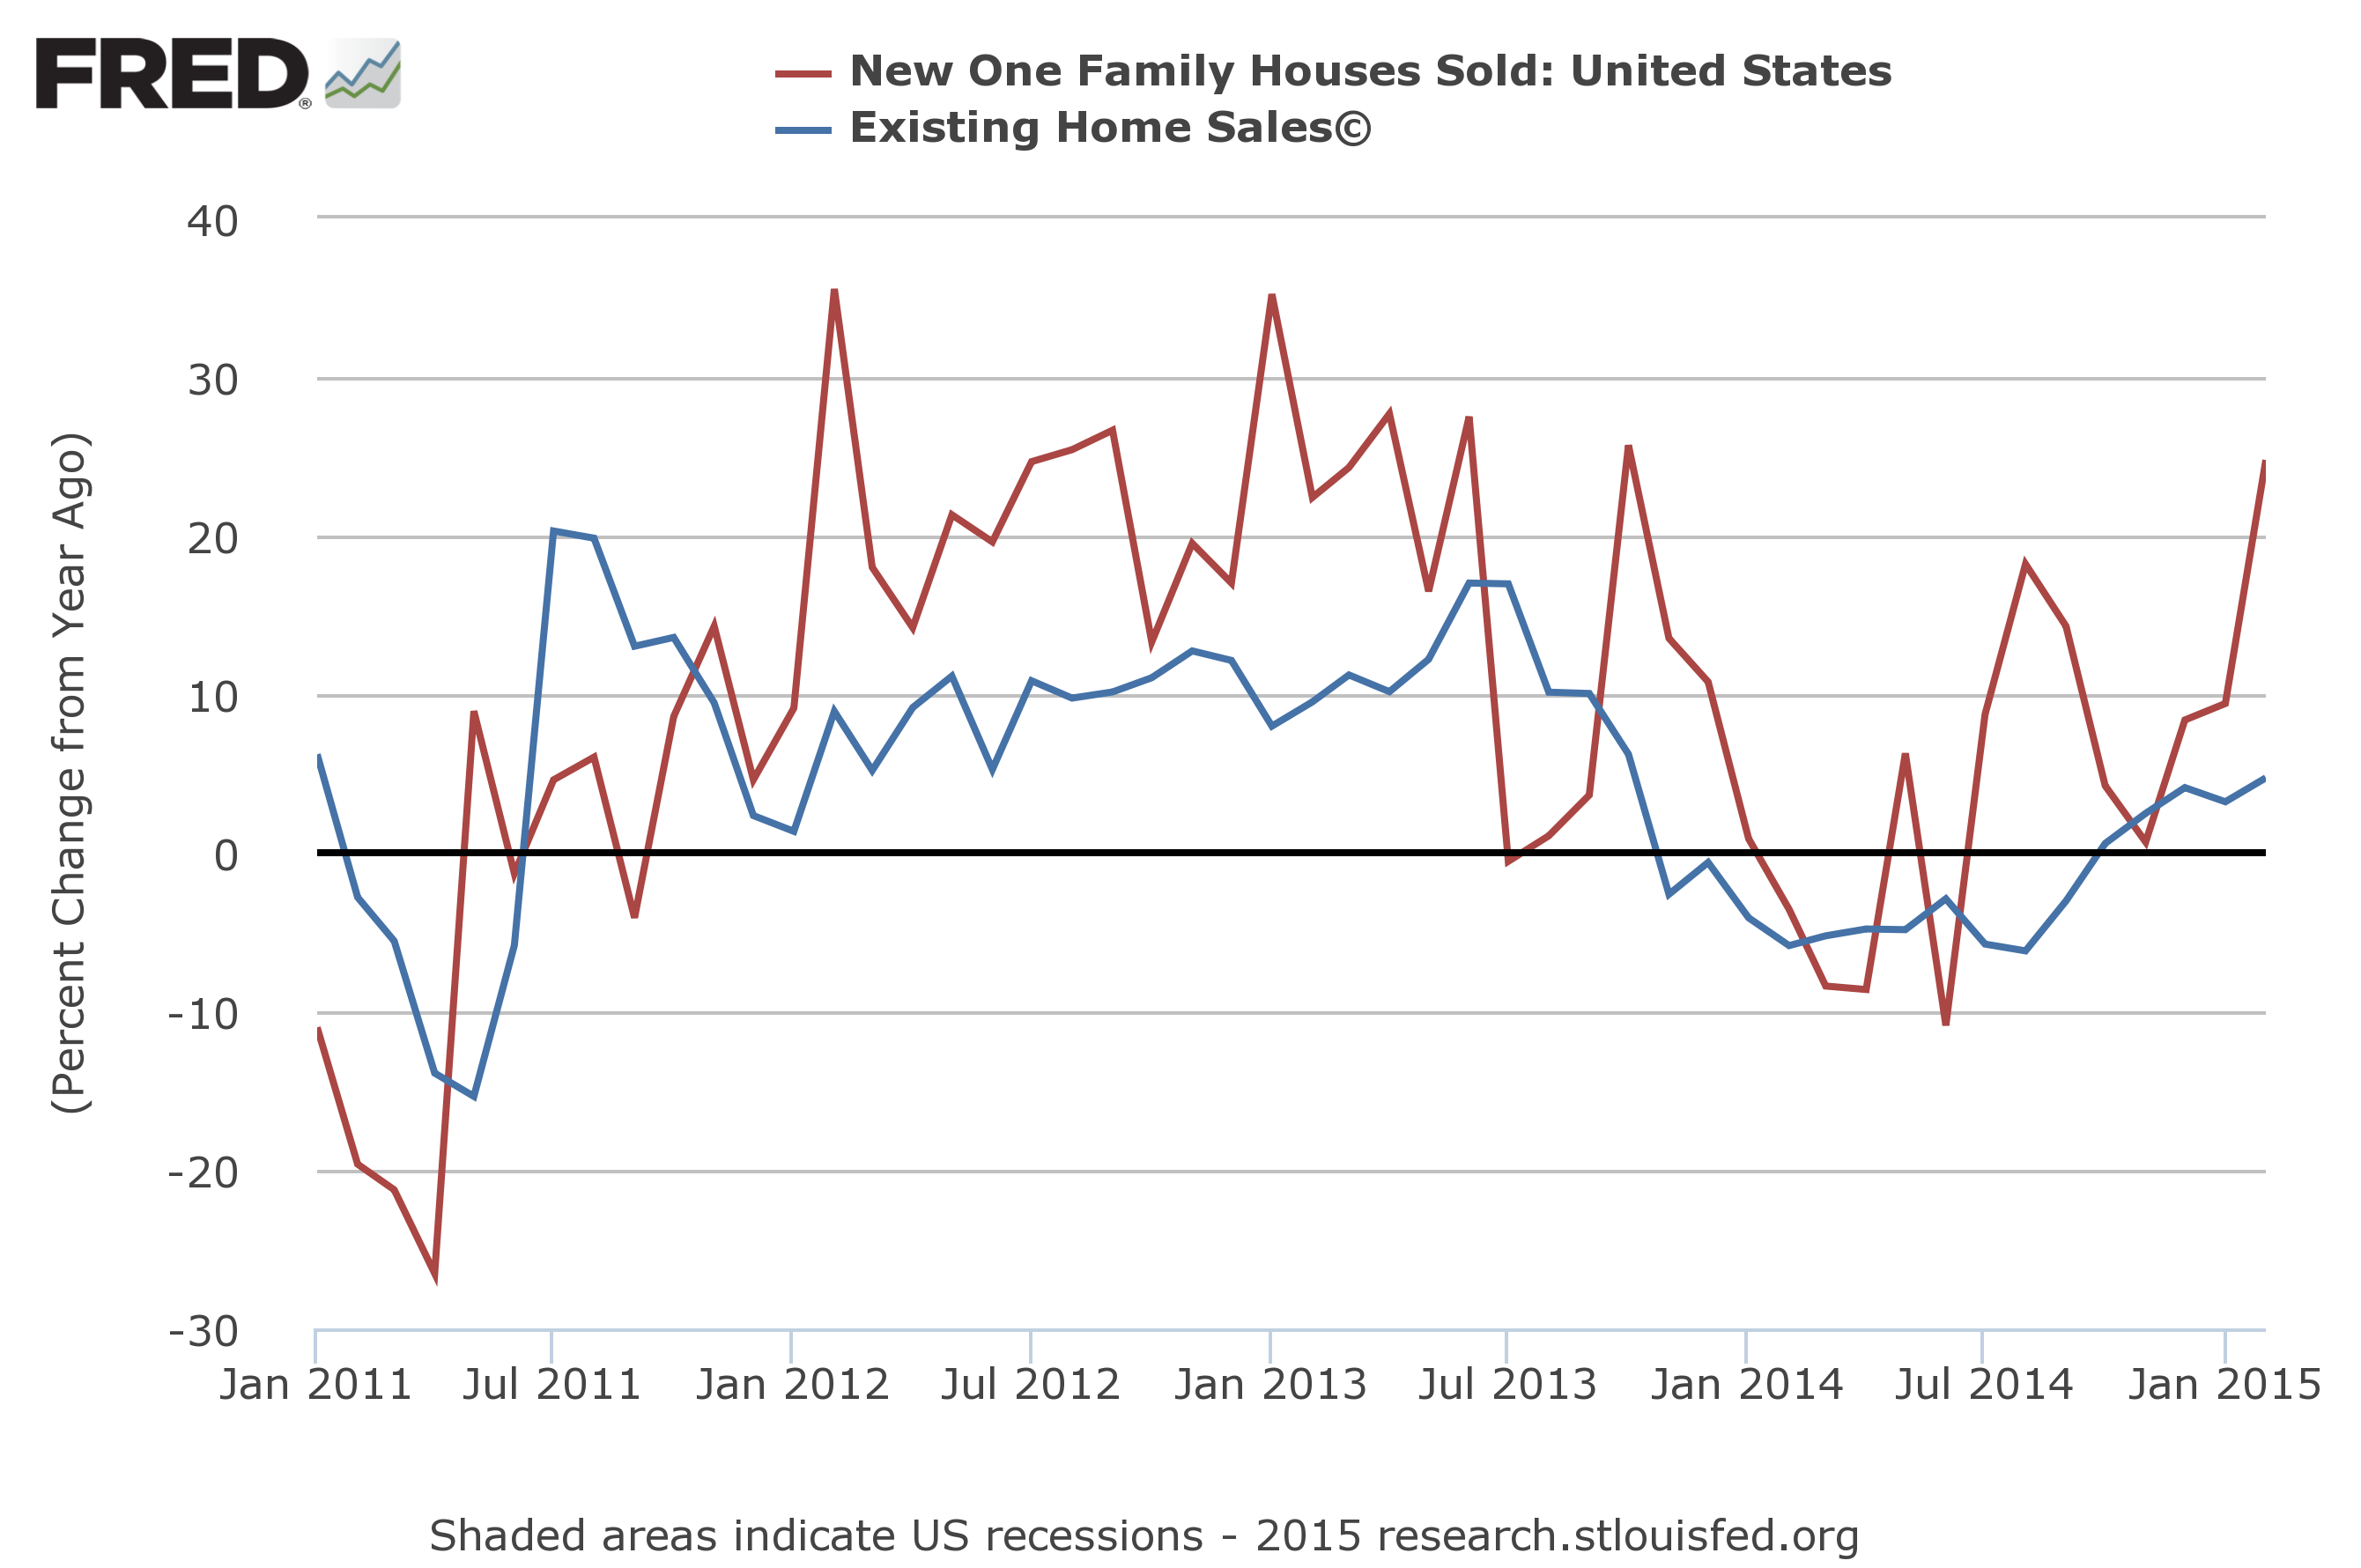 US: New Homes Sold vs Existing Homes Sold 2011-Present